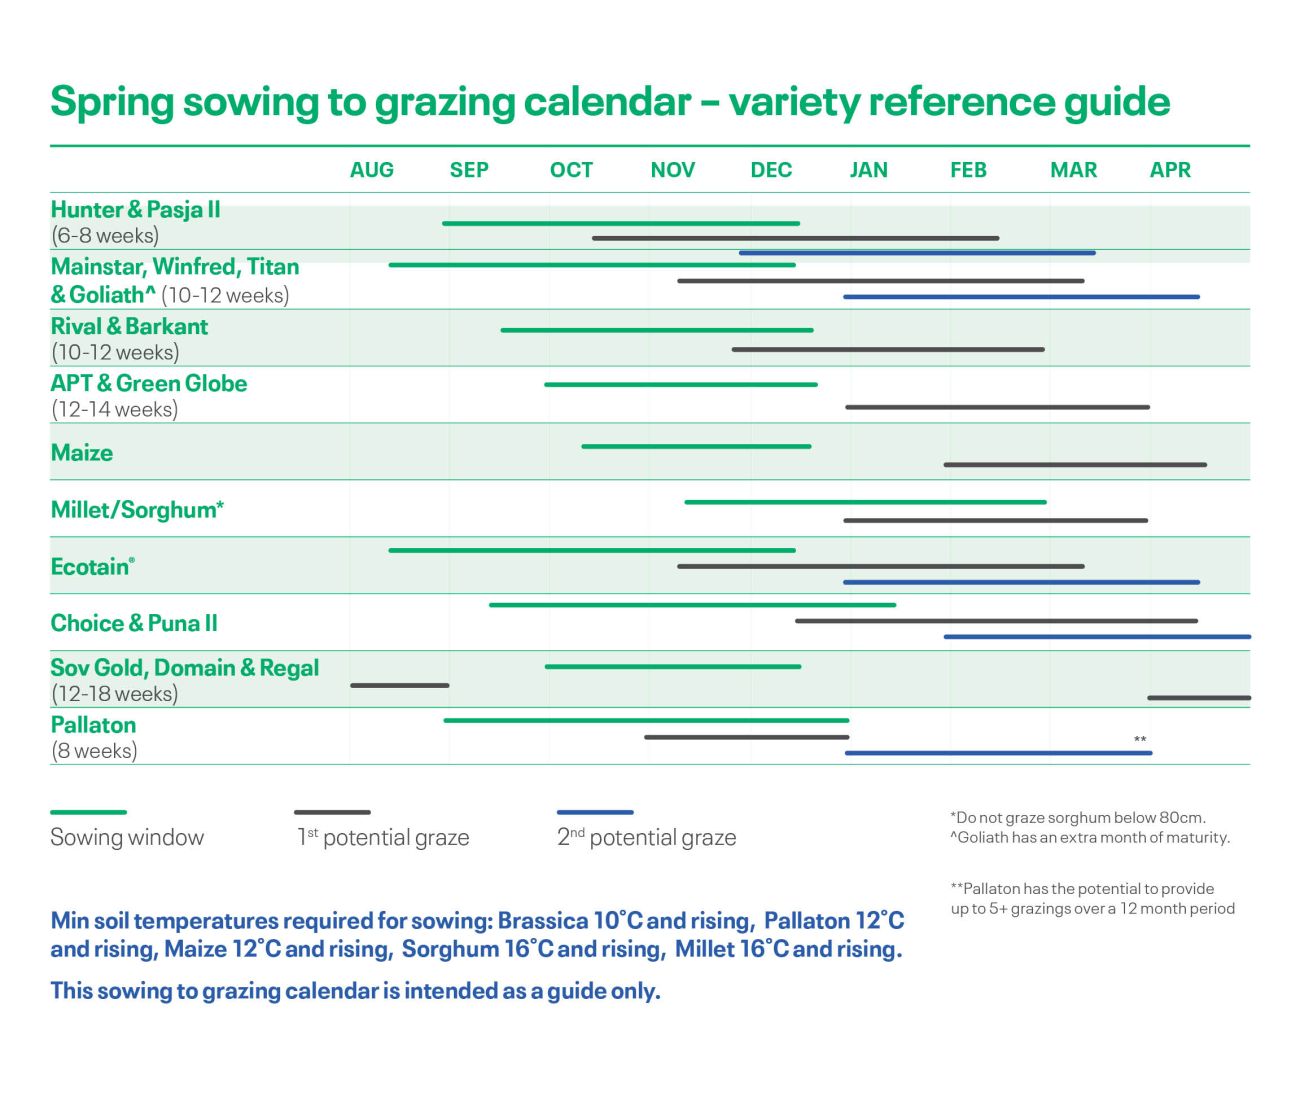 A visual guide to sowing and grazing times for DLF Seeds brassica cultivars